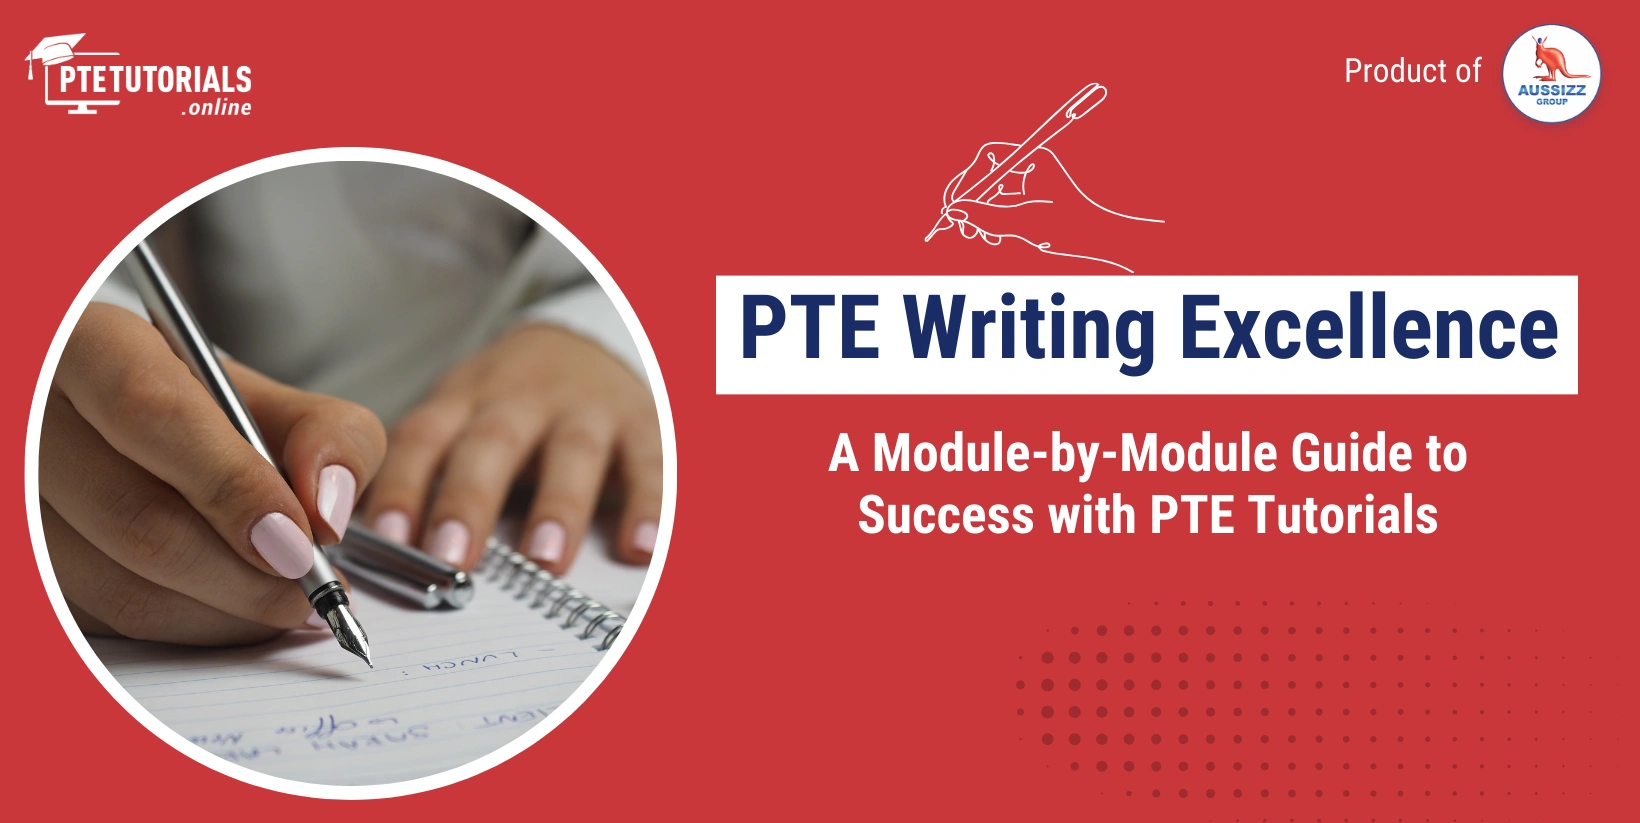 PTE Writing